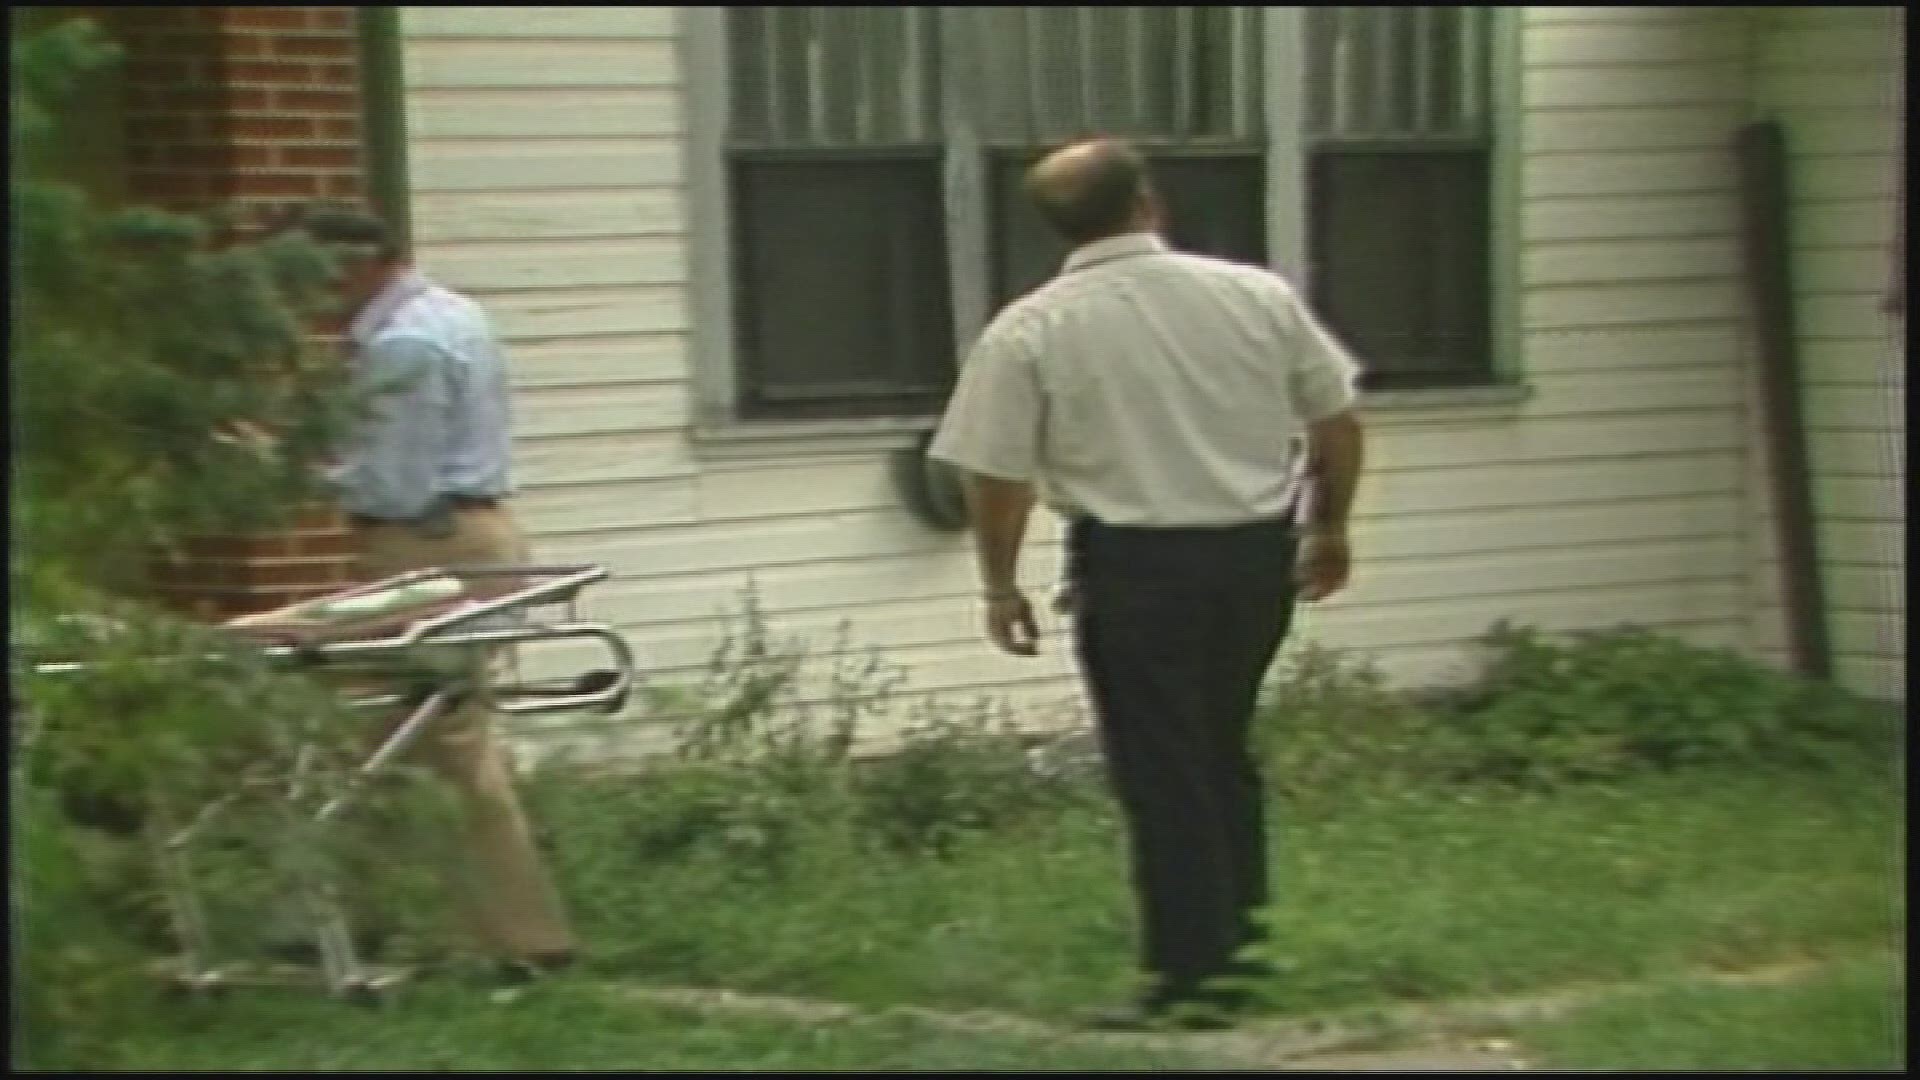 Sylvia Quayle, 35, was found dead inside her Cherry Hills Village home in August 1981. A 9NEWS report from 1983 details what investigators knew about the case then.